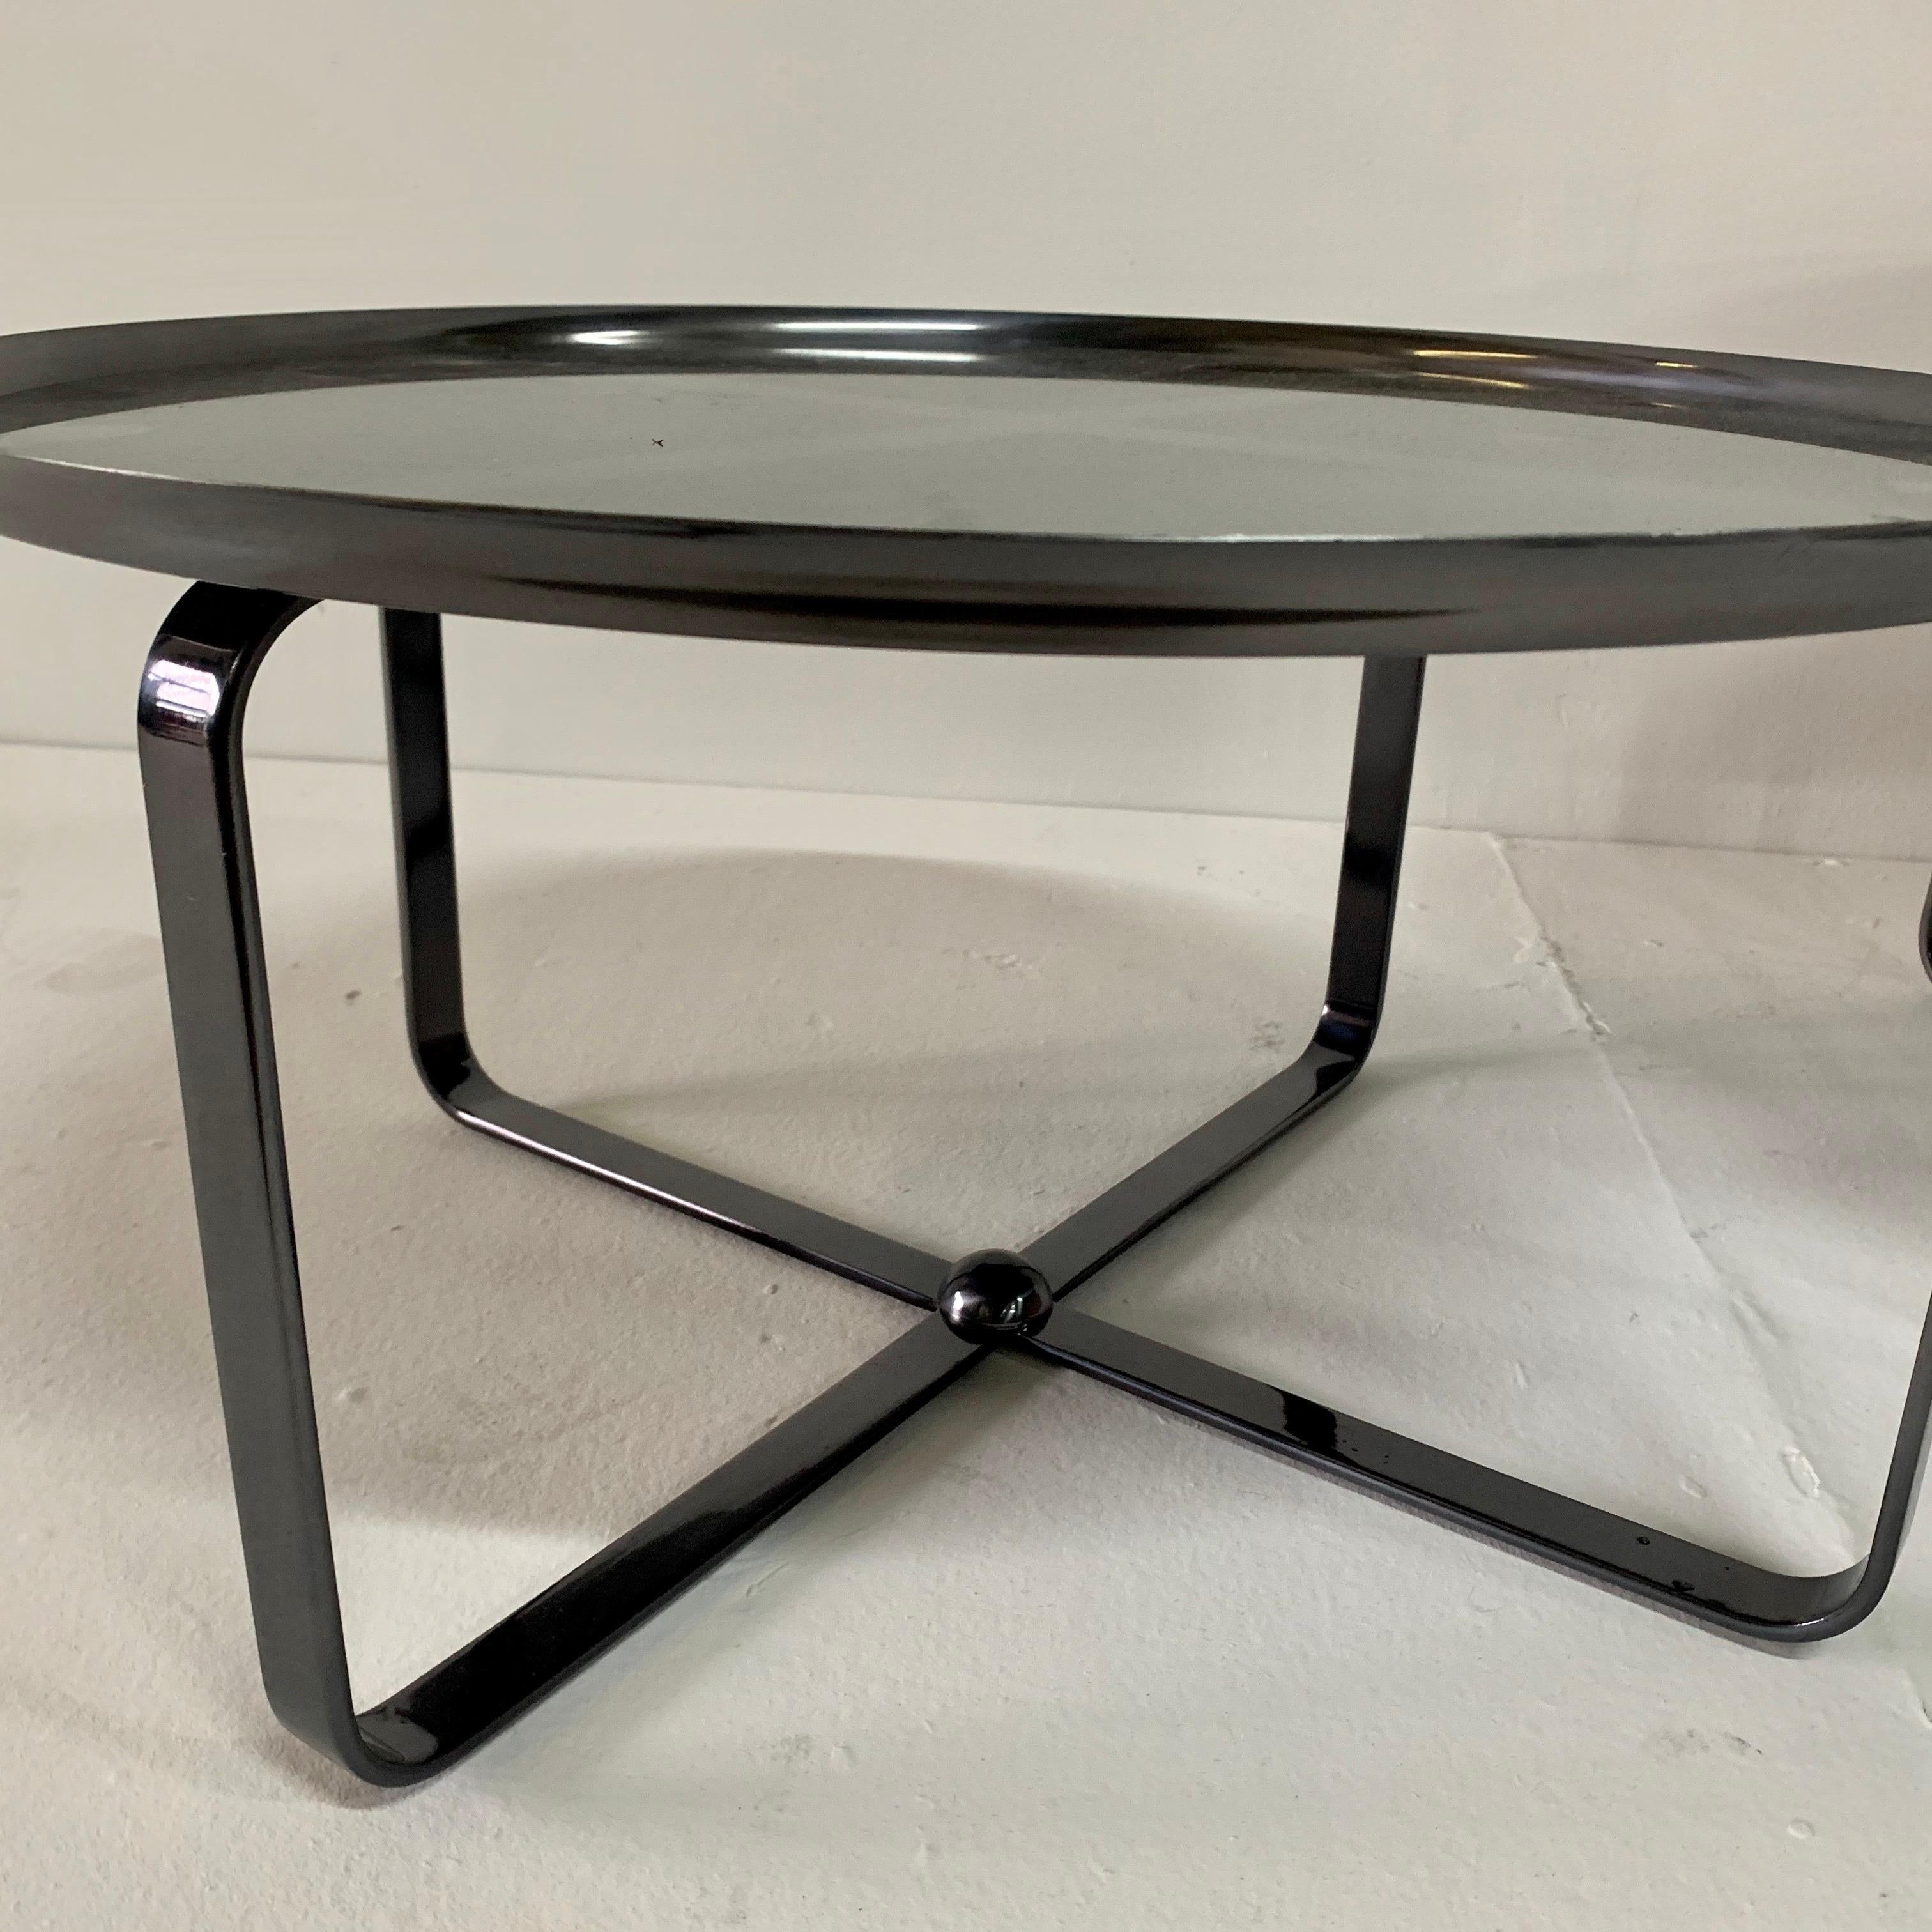 Contemporary, multi-purpose low side tables in gray pewter finish with a mirror top.

Note: dimensions of taller table is 22.75 inches diameter and 16 inches tall, lower table is 22.75 inch diameter and 12 inches tall.